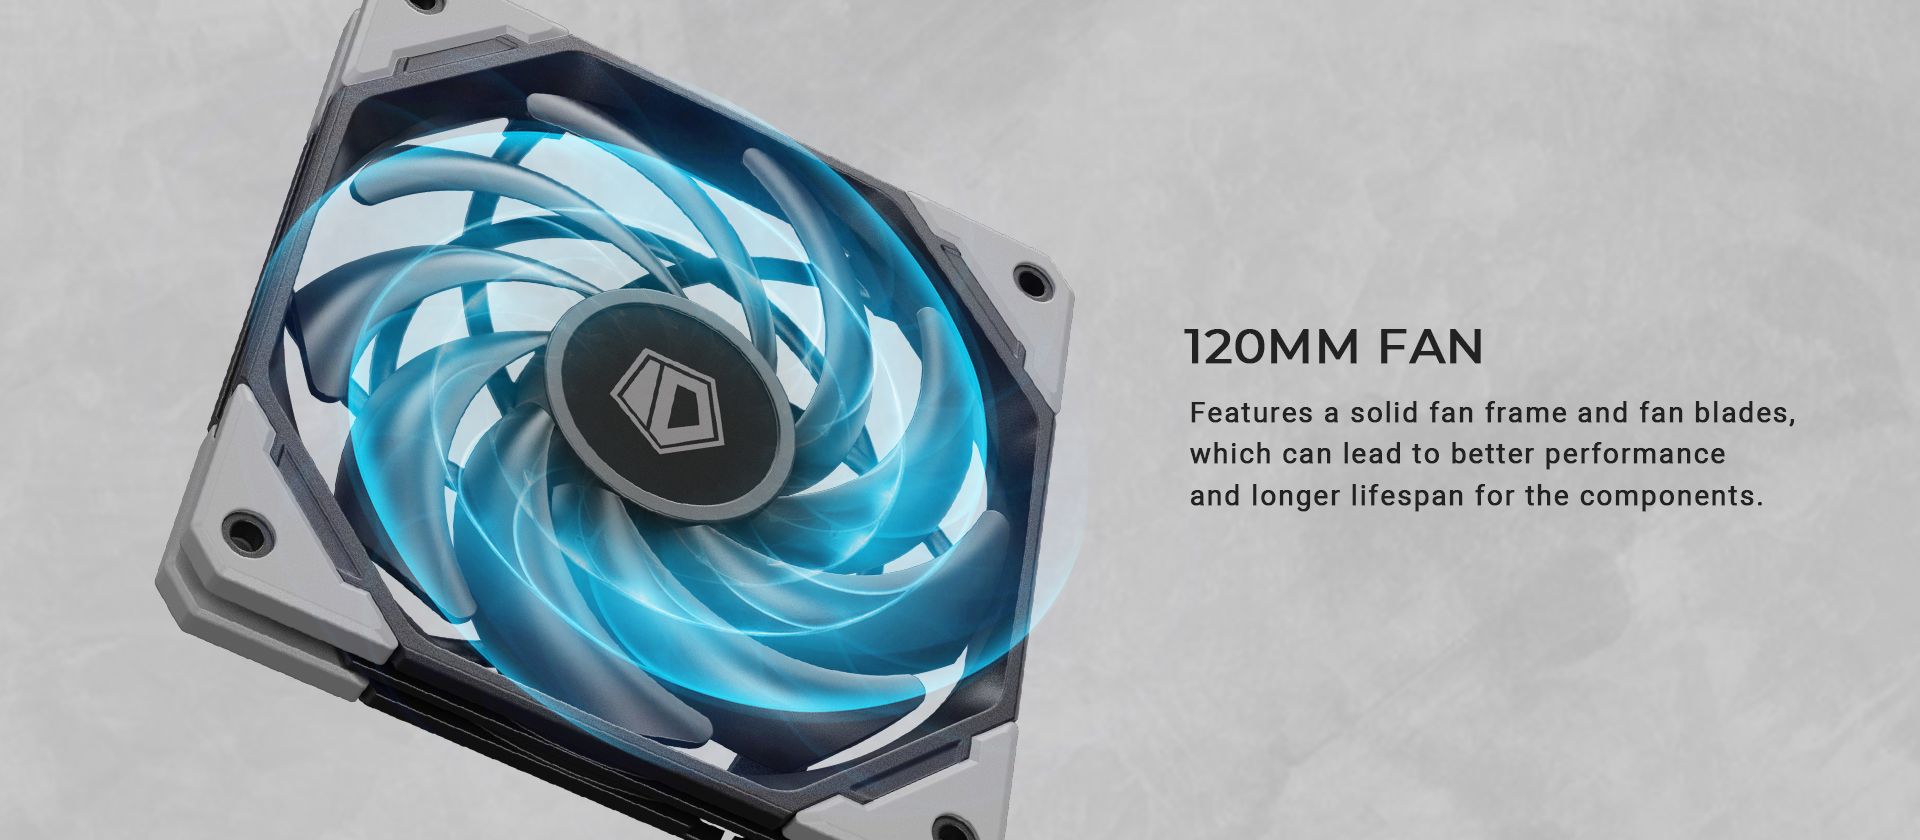 A large marketing image providing additional information about the product ID-COOLING Iceland Series IS-50X V3 Low Profile CPU Cooler - Additional alt info not provided